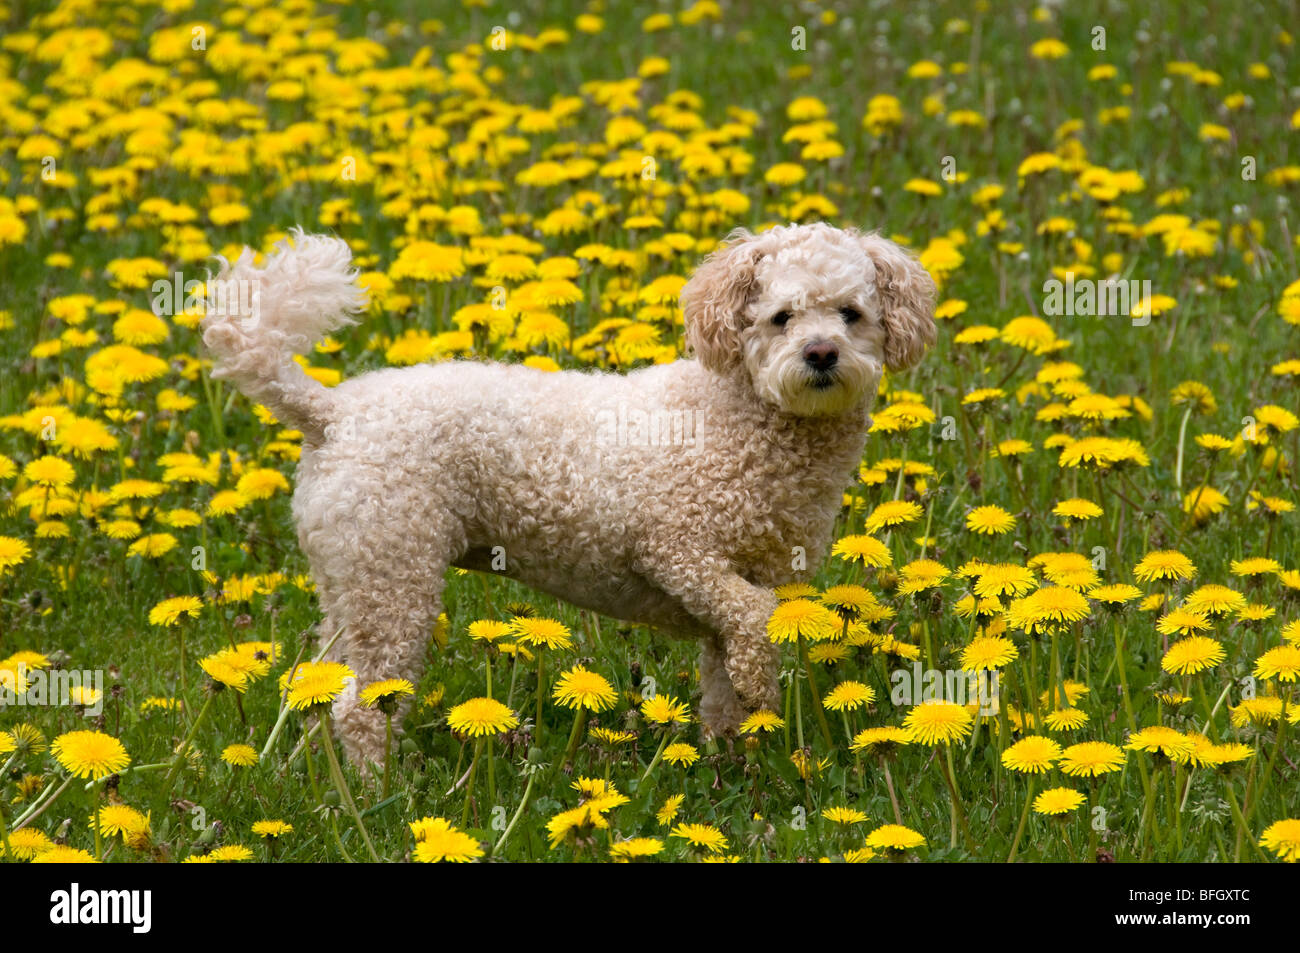 Cute poodle-bichon mix standing in field of yellow dandelions. Ontario, Canada. Stock Photo